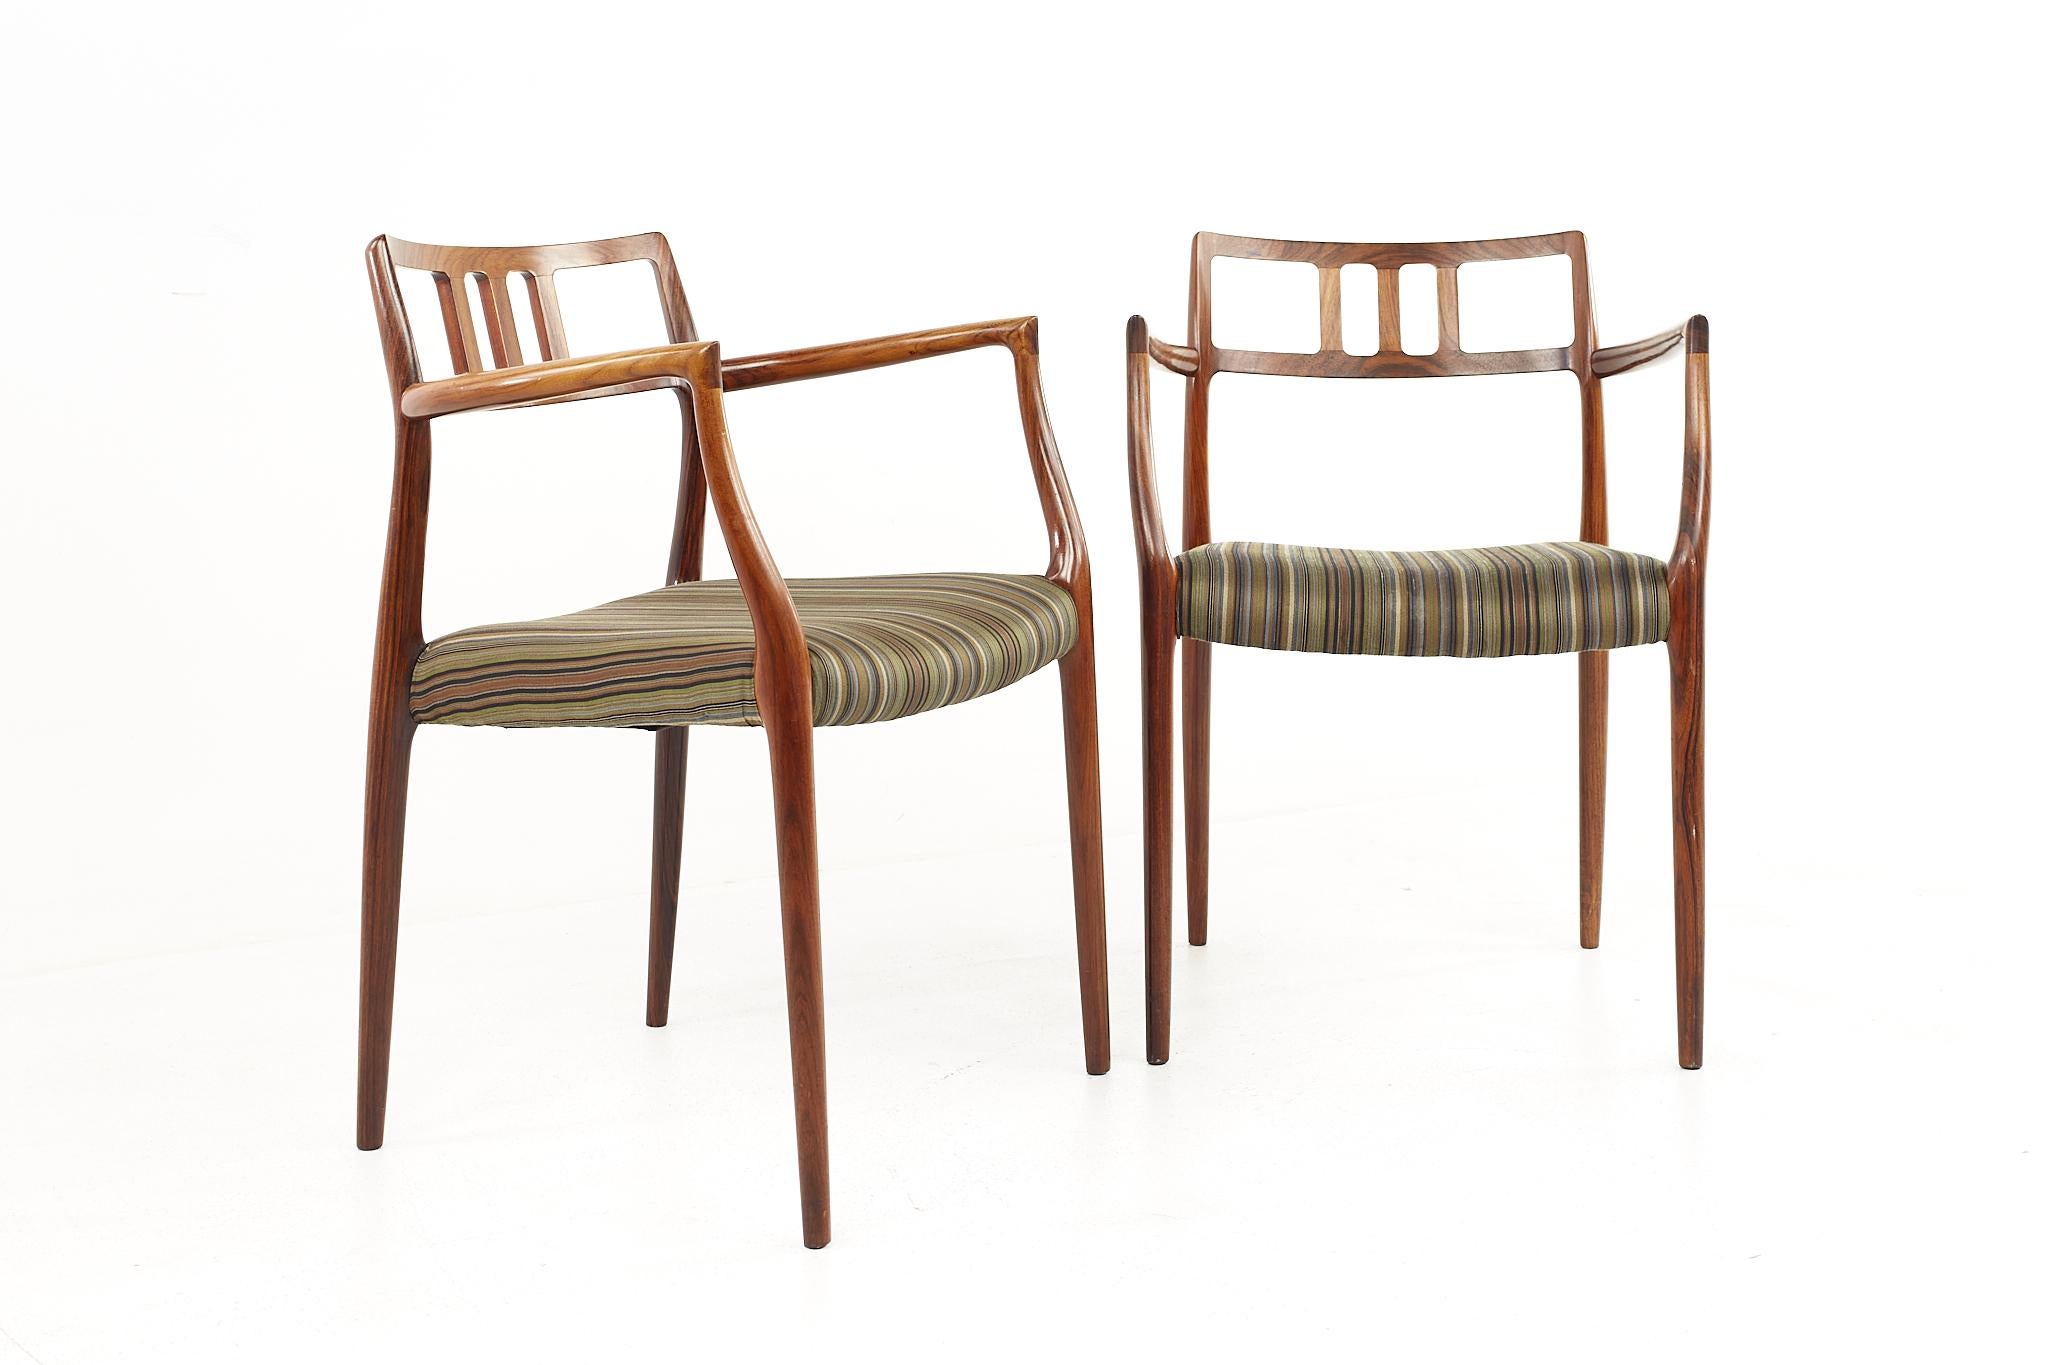 Niels Otto Moller mid century rosewood captains dining chairs - a Pair 

Each chair measures: 22 wide x 19 deep x 31 high, with a seat height of 18 inches and arm height of 28 inches

All pieces of furniture can be had in what we call restored